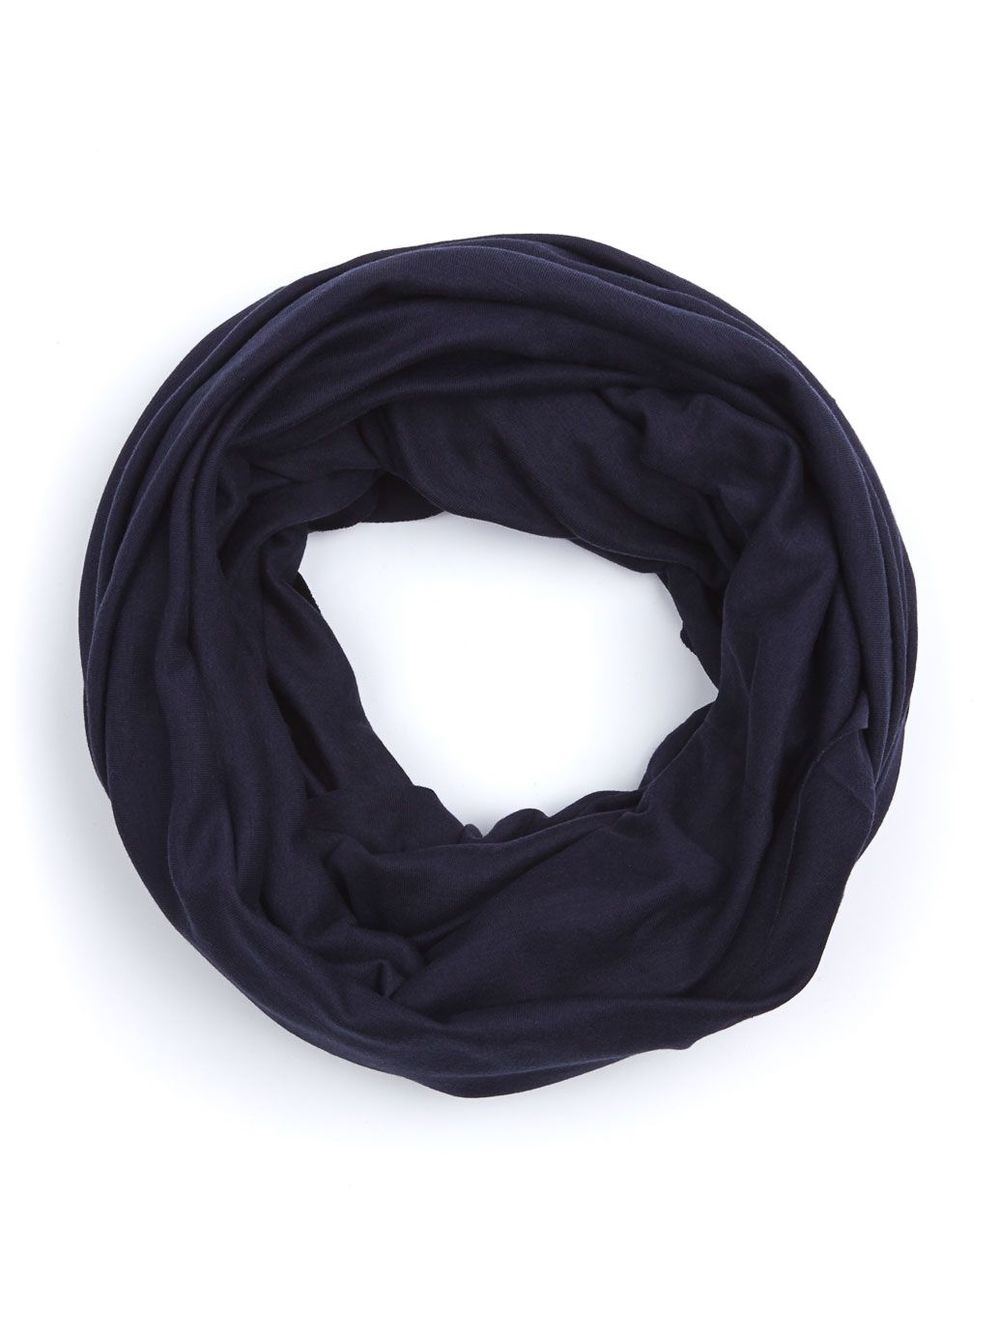  The Unisex Circle Scarf. American Apparel. Available in multiple colors. $28. Some colors on sale. 